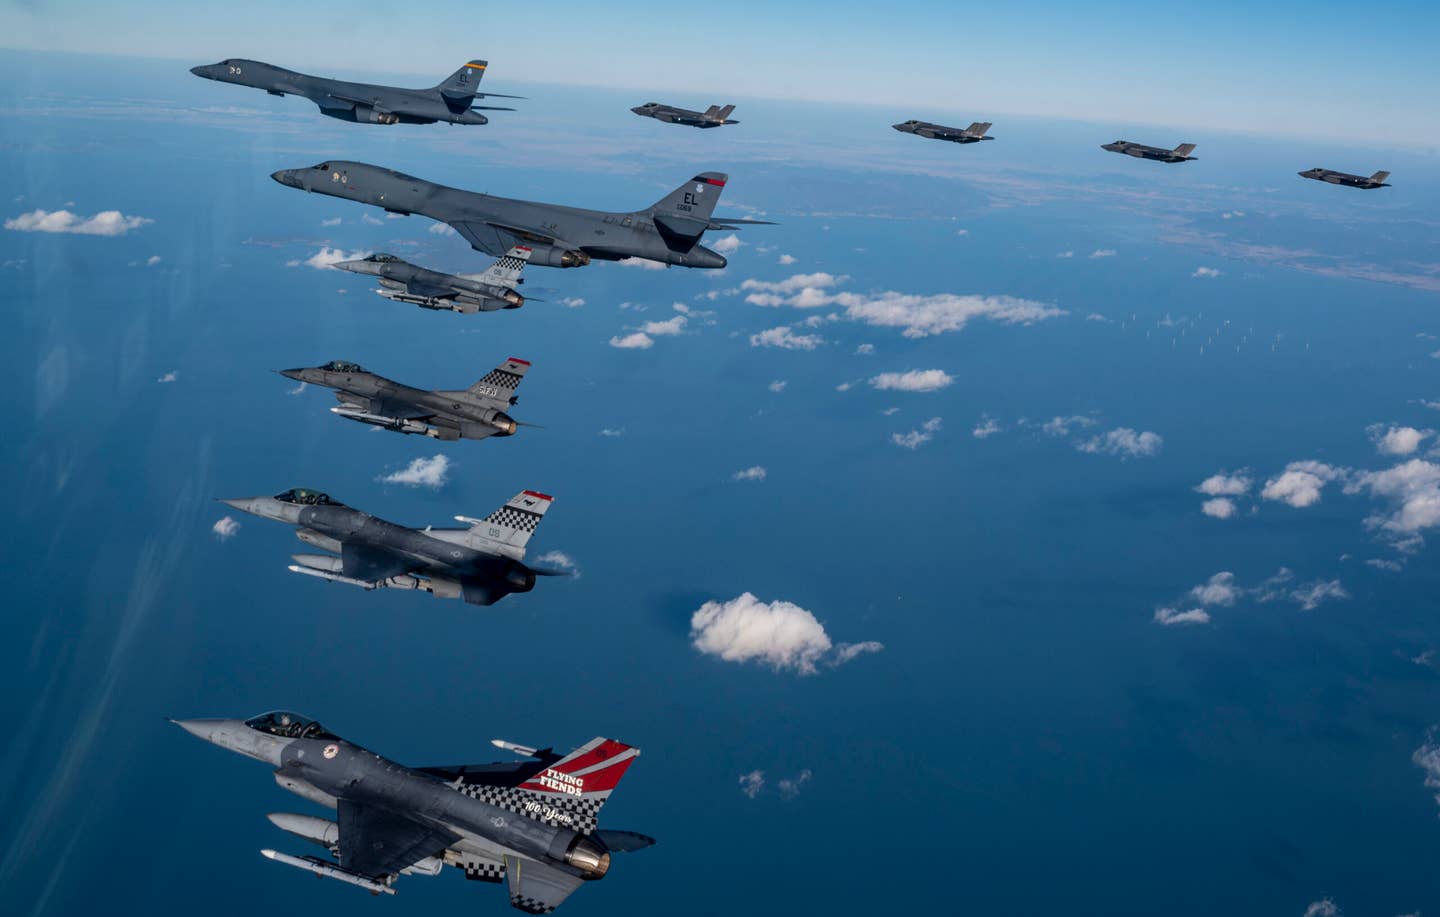 U.S. Air Force F-16C fighters and B-1B bombers join Republic of Korea Air Force F-35As in a combined training flight over the Korean peninsula as part of Vigilant Storm 23, November 5, 2022. <em>U.S. Air Force photo by Staff Sgt. Dwane R. Young</em>